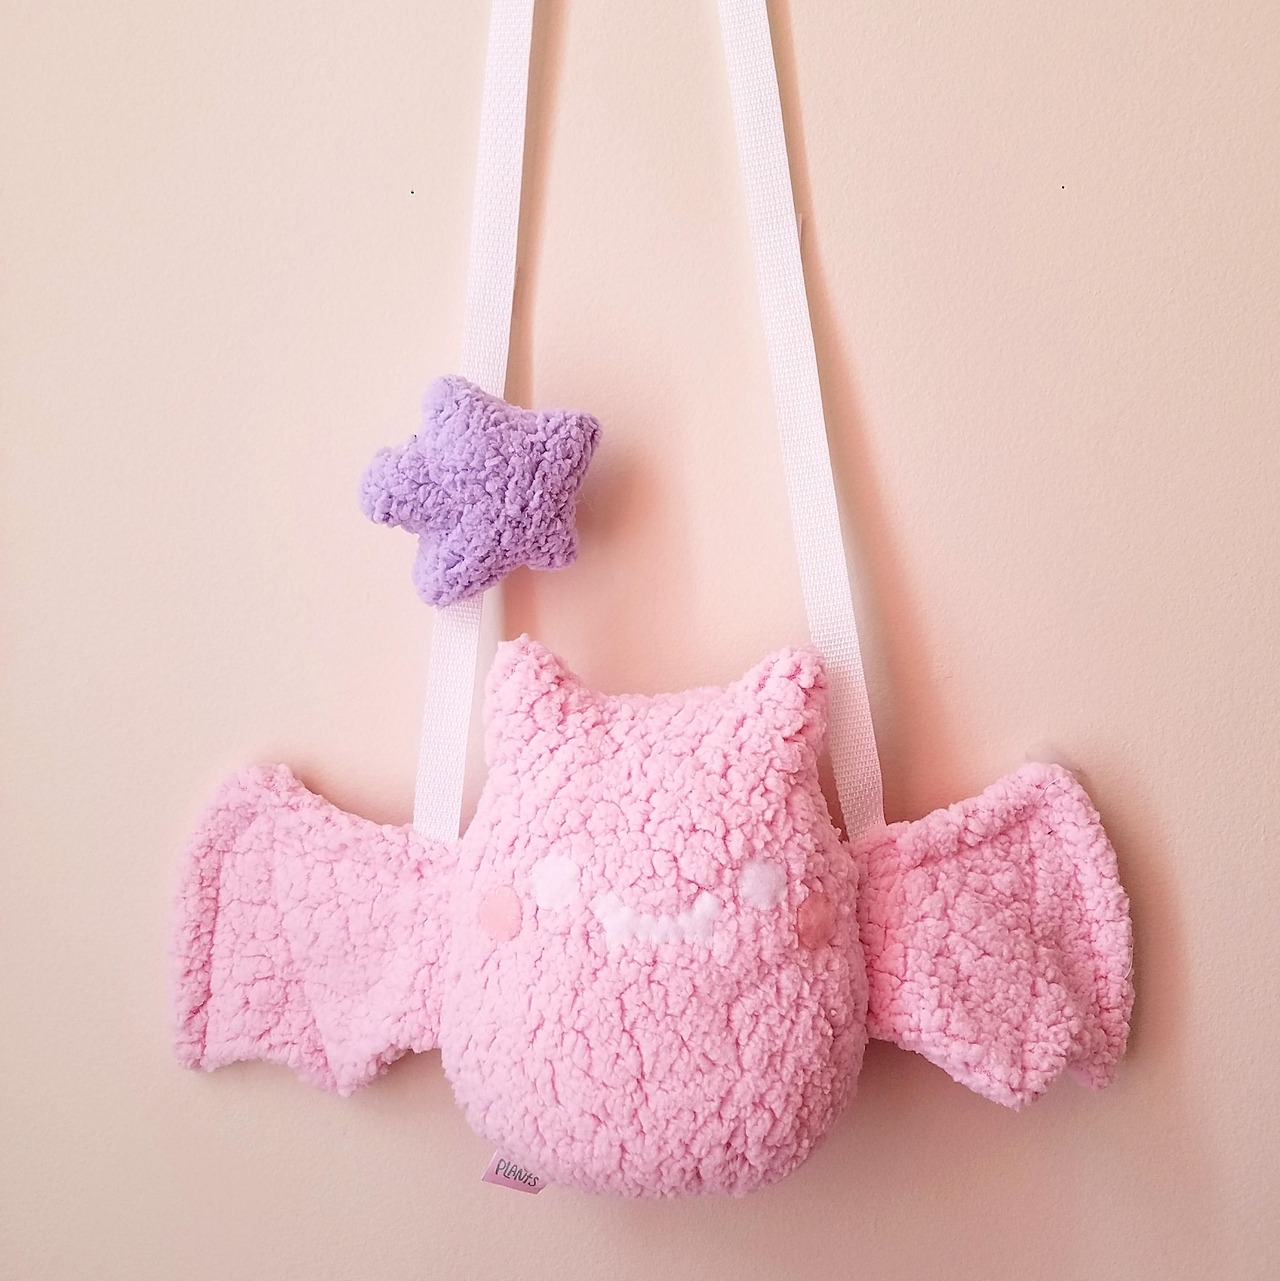 sosuperawesome:Plush Purses, Toys, Bow Ties and  Headbands, by Anastasia Holl on